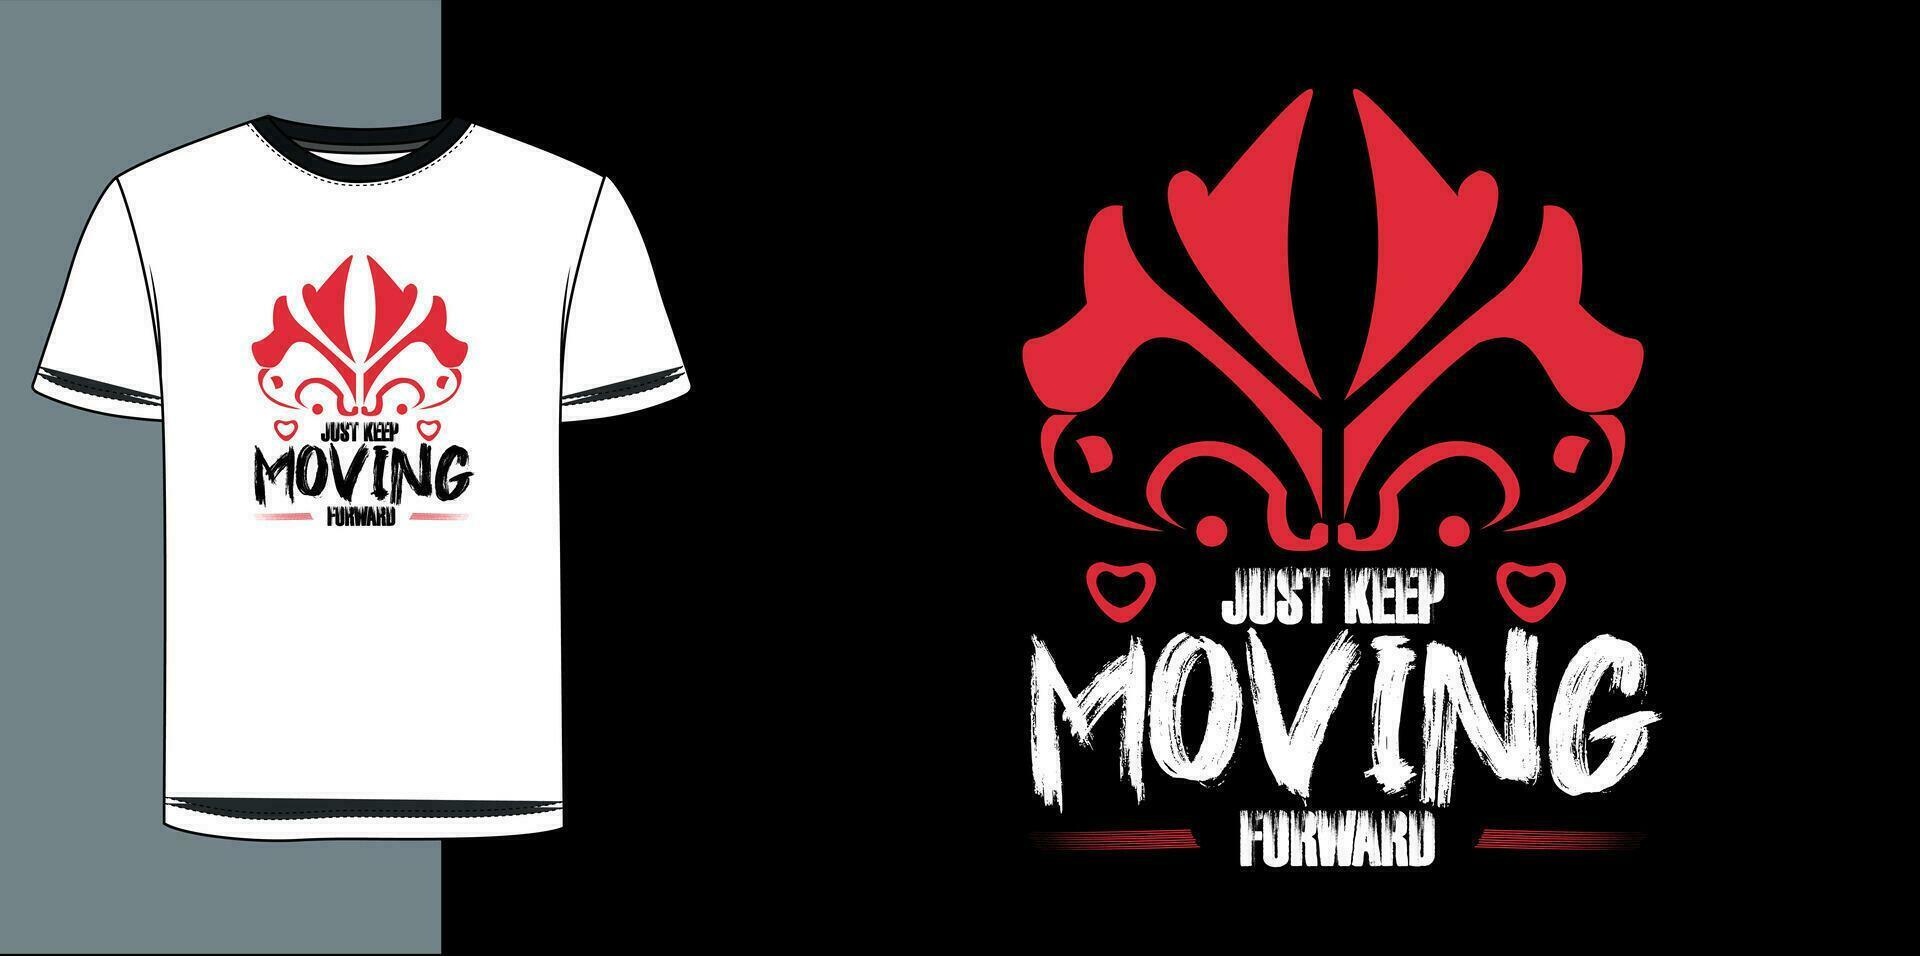 just keep moving forward motivational typography tshirt design graphic. vector